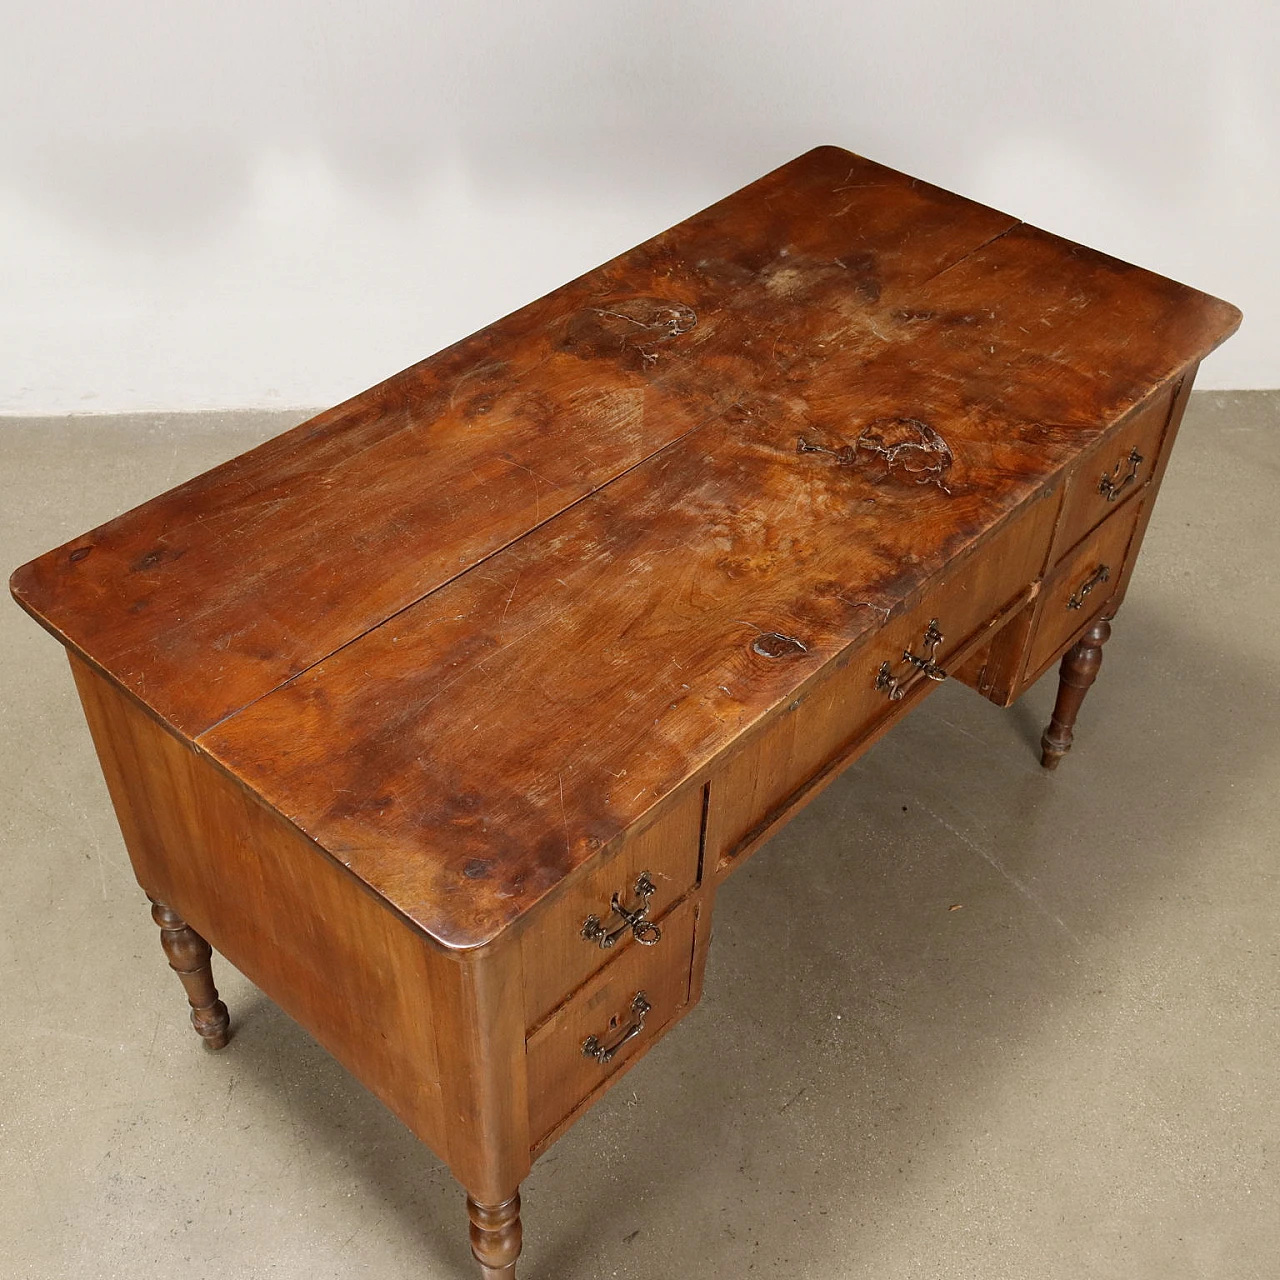 Desk in walnut with 5 drawers and fir interior, 19th century 3